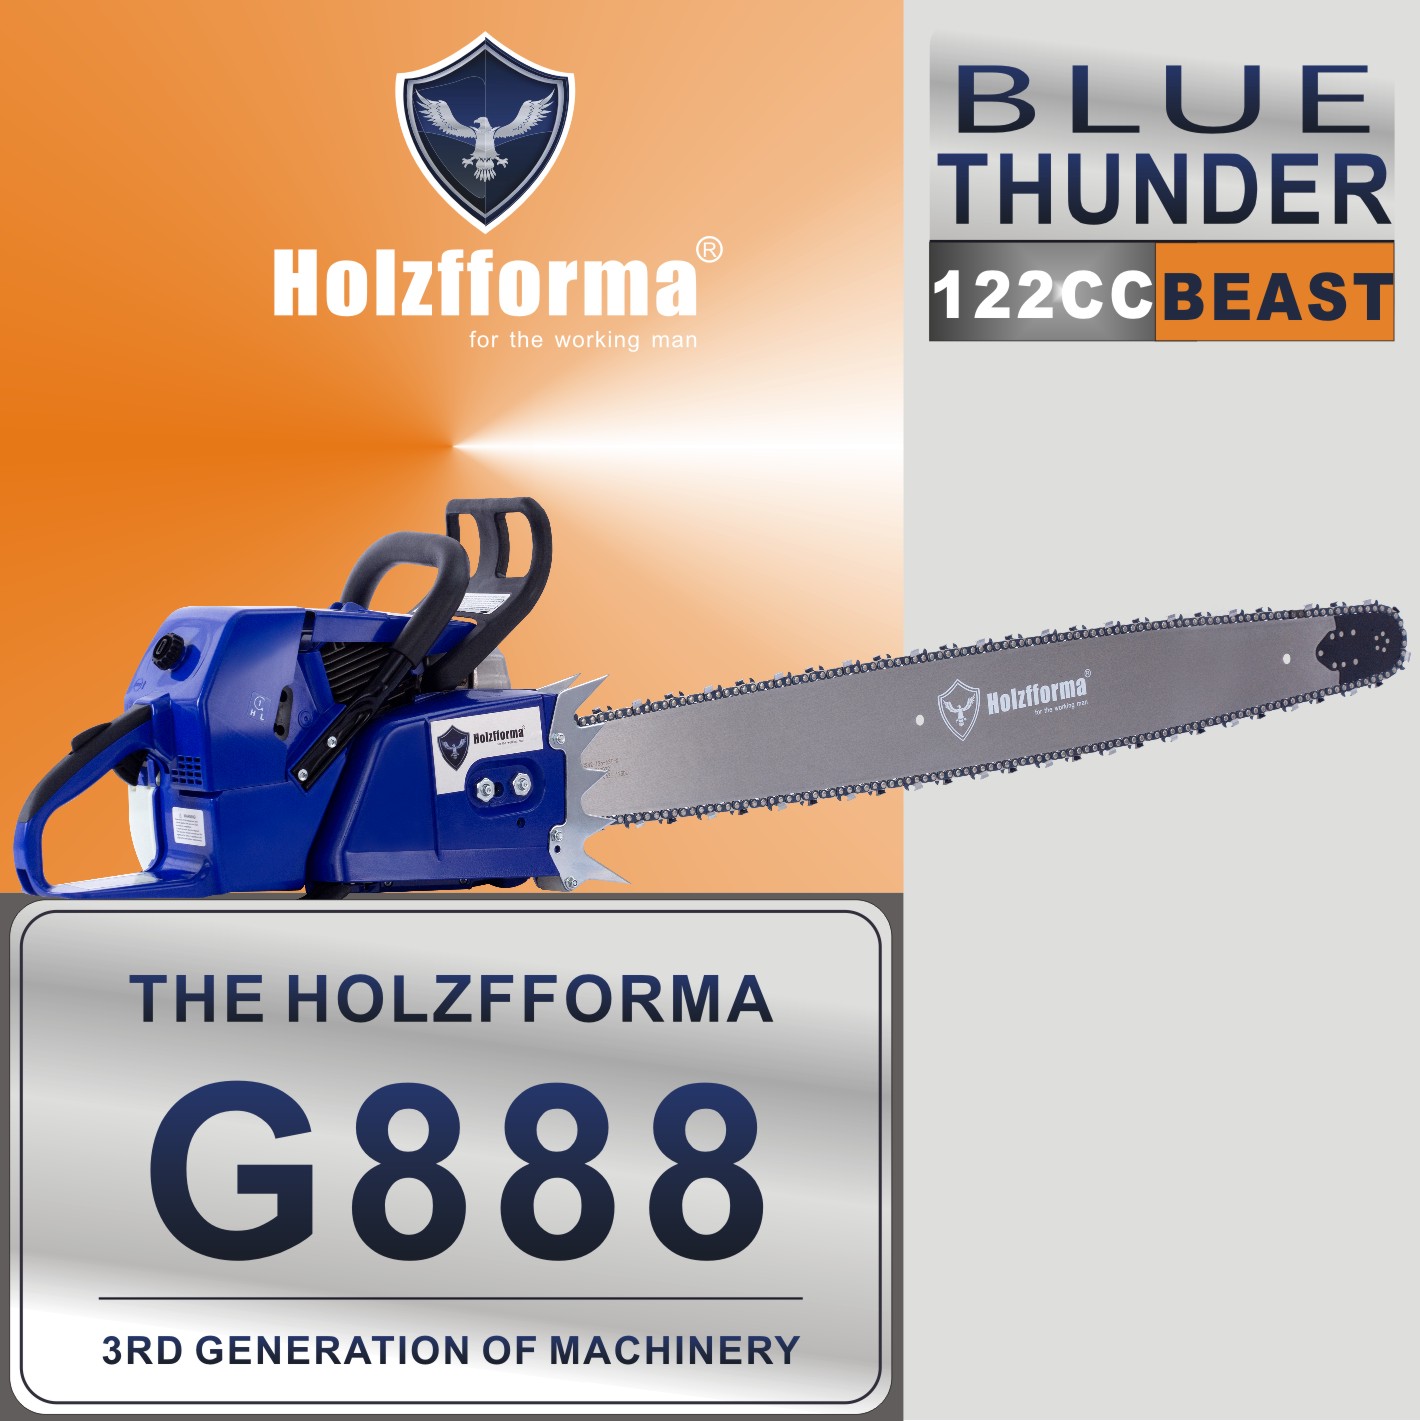 Holzfforma 18" Guide Bar Chain .325" .063" 68DL For Stihl MS170 MS171 MS180 017